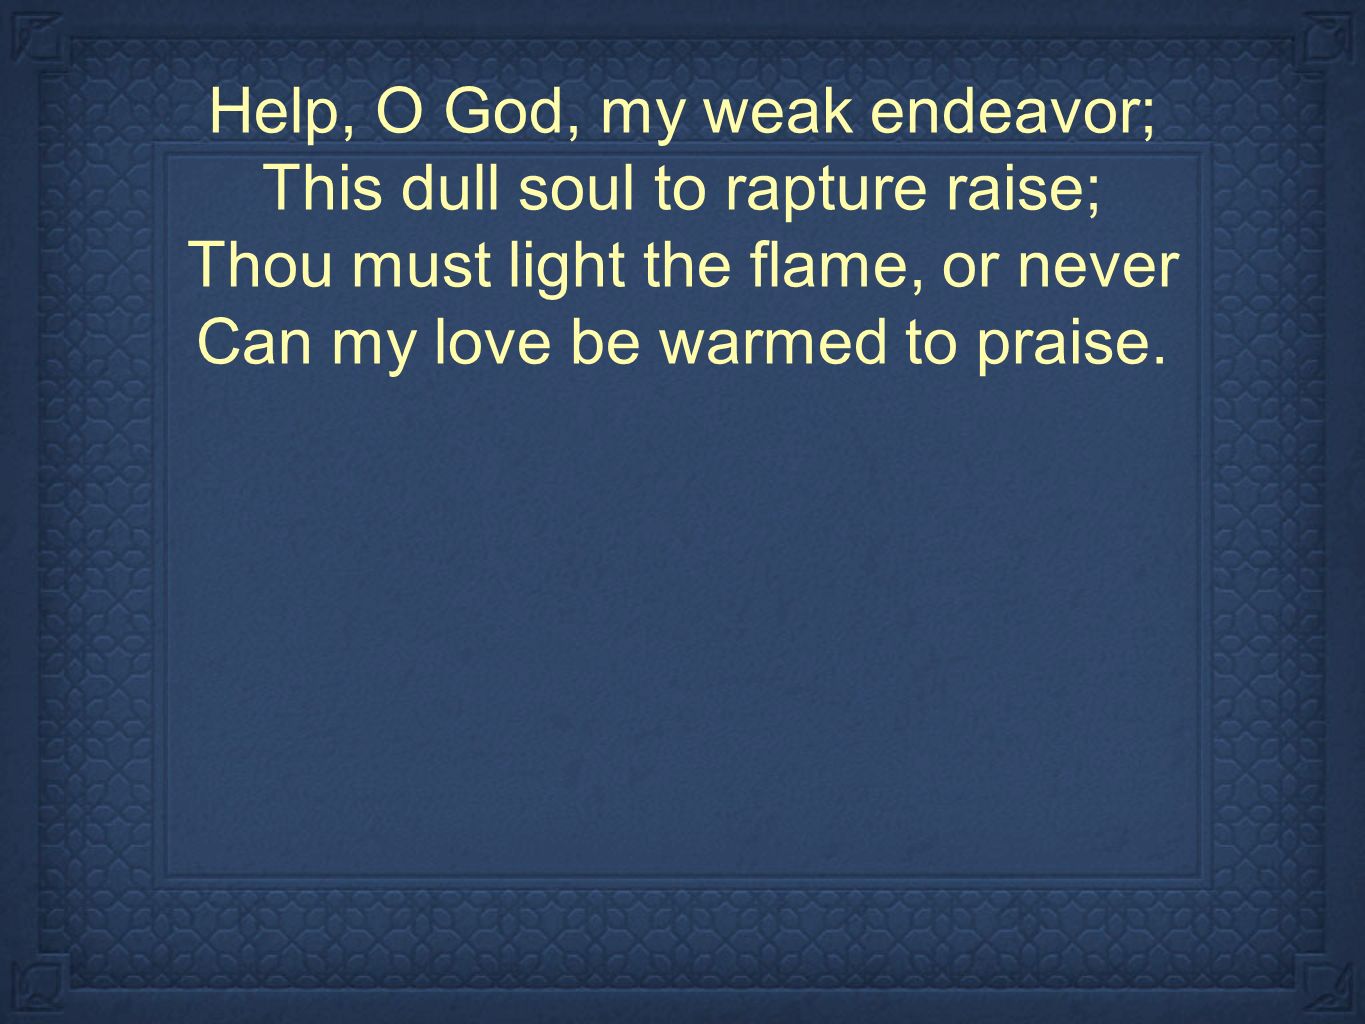 Help, O God, my weak endeavor; This dull soul to rapture raise; Thou must light the flame, or never Can my love be warmed to praise.